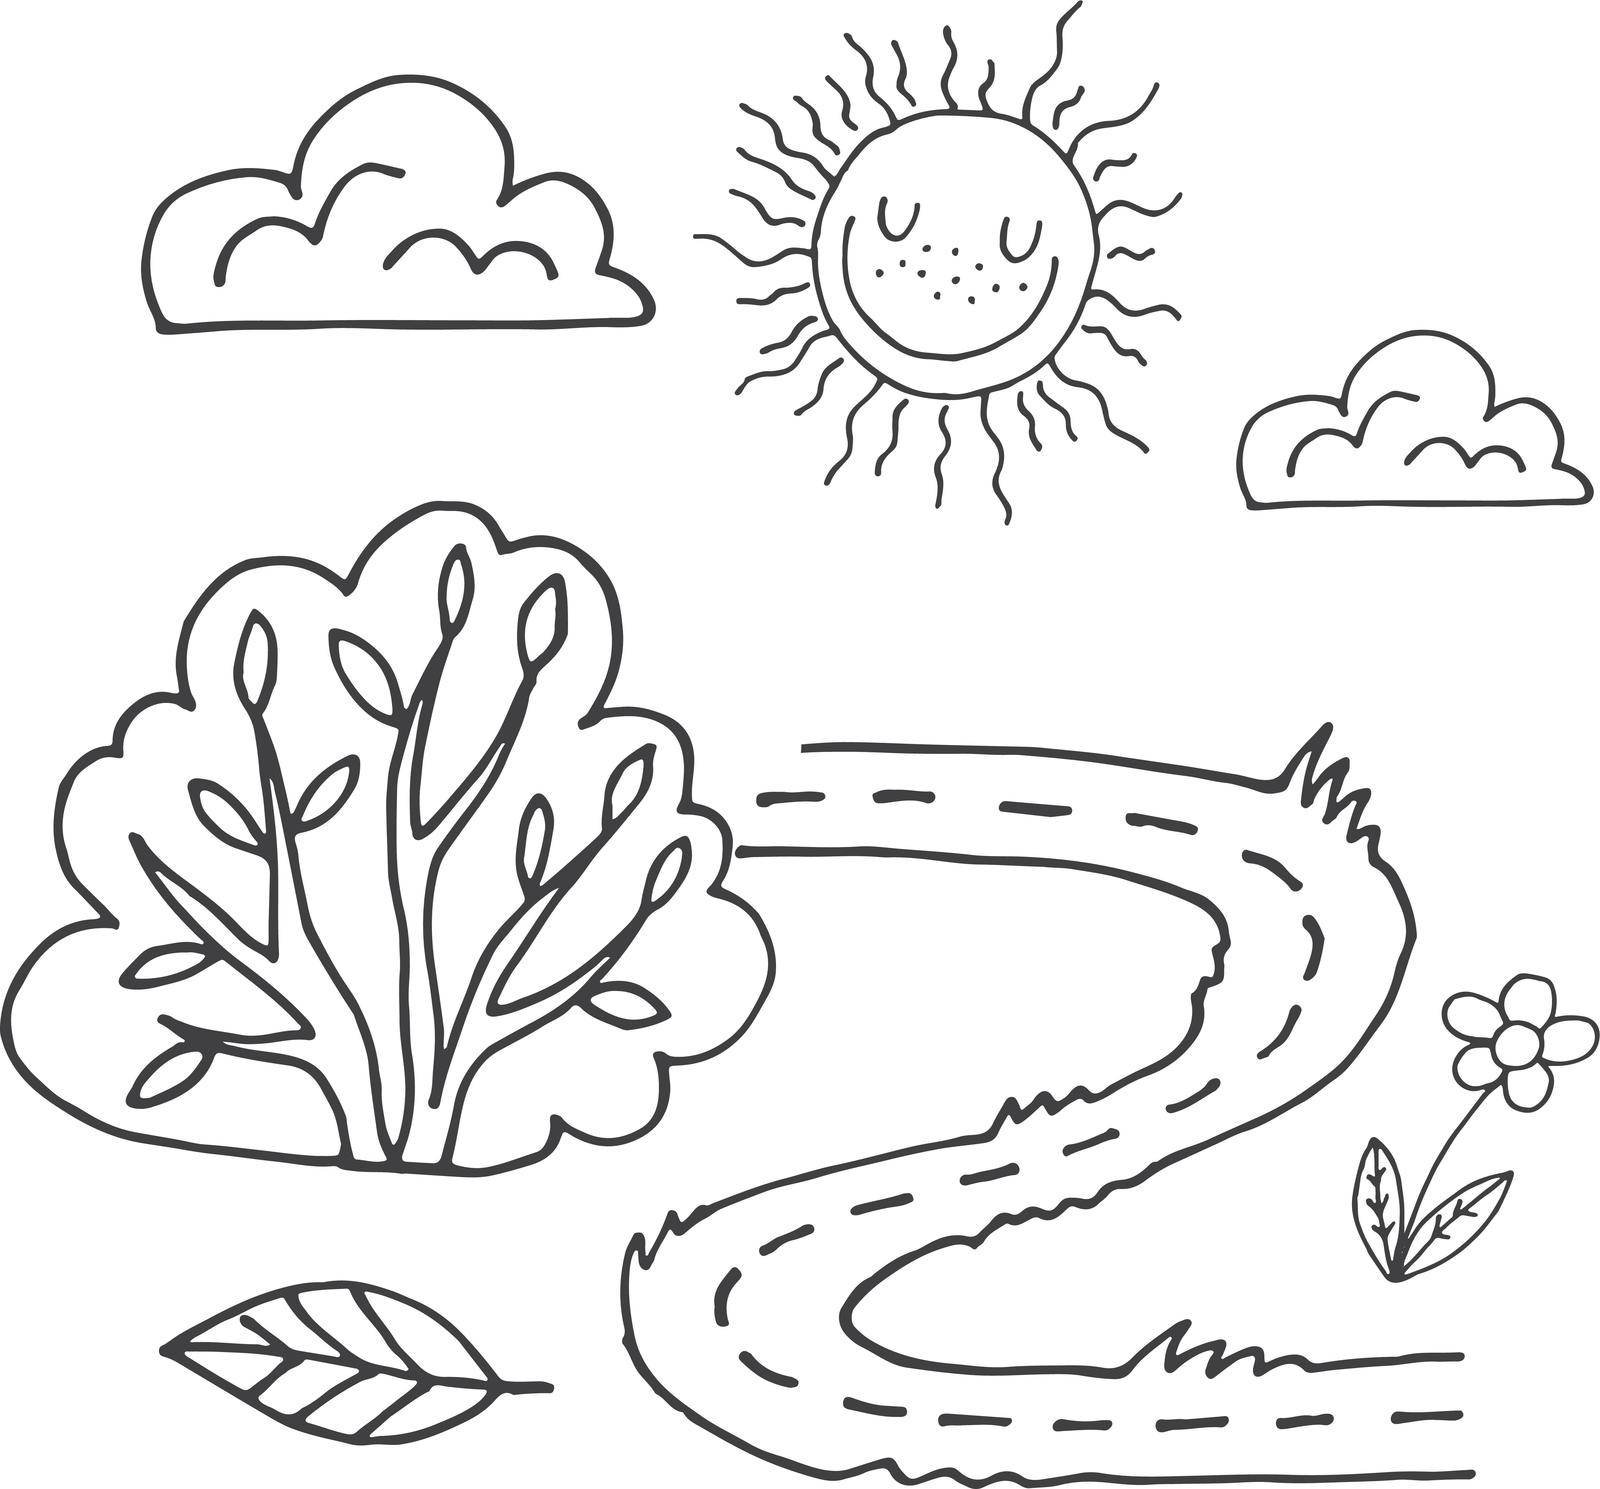 Summer nature child drawing. Coloring book landscape page isolated on white background